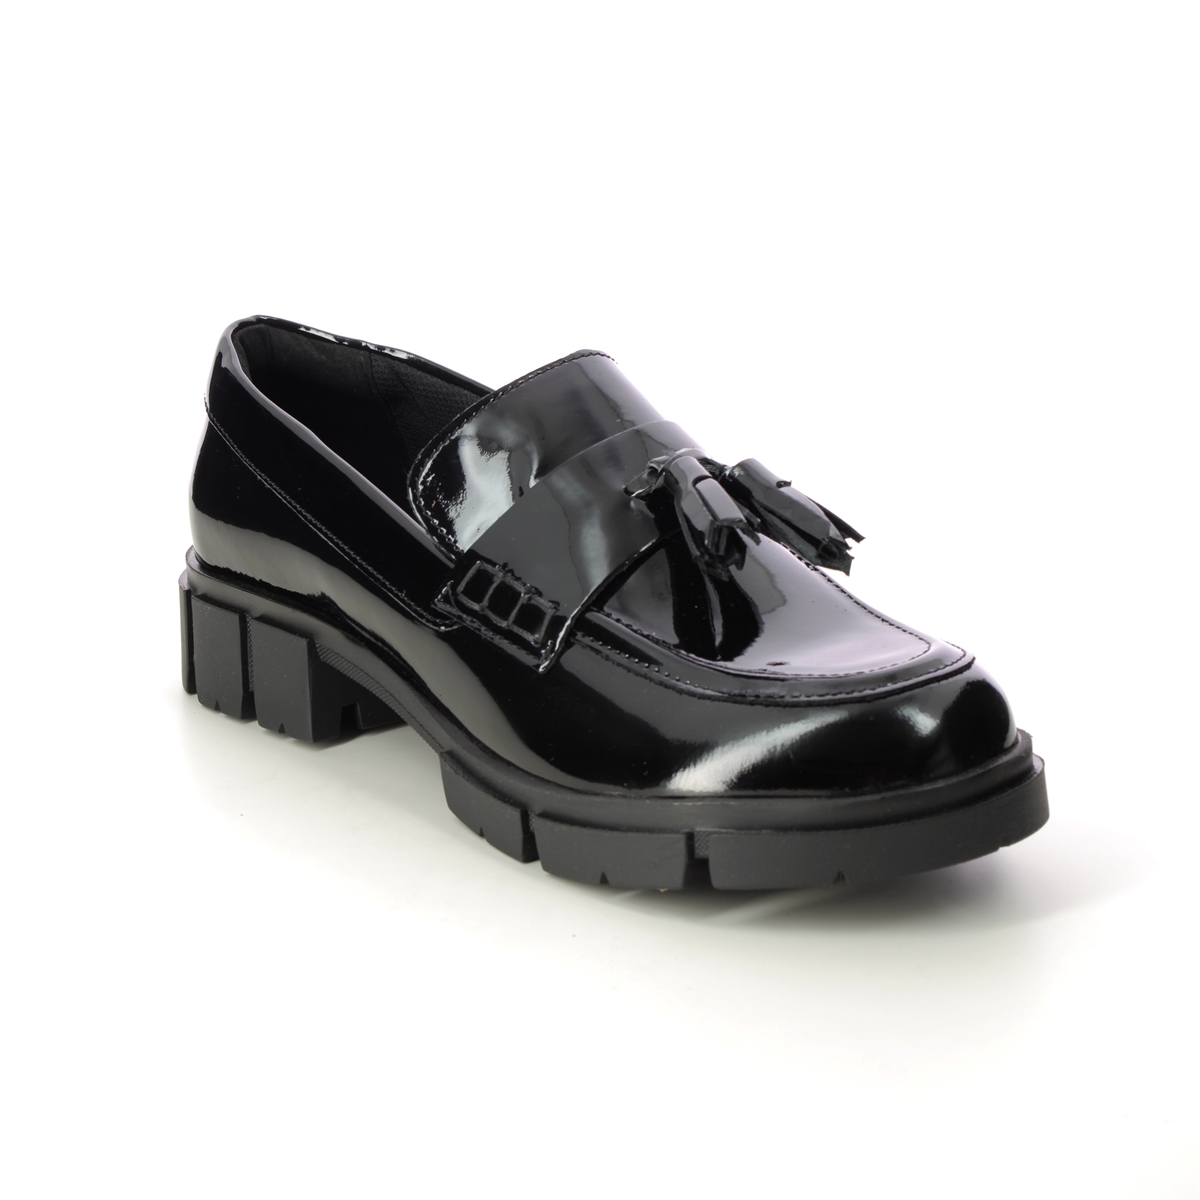 Clarks Teala Loafer Black patent Womens loafers 6899-84D in a Plain Leather in Size 6.5